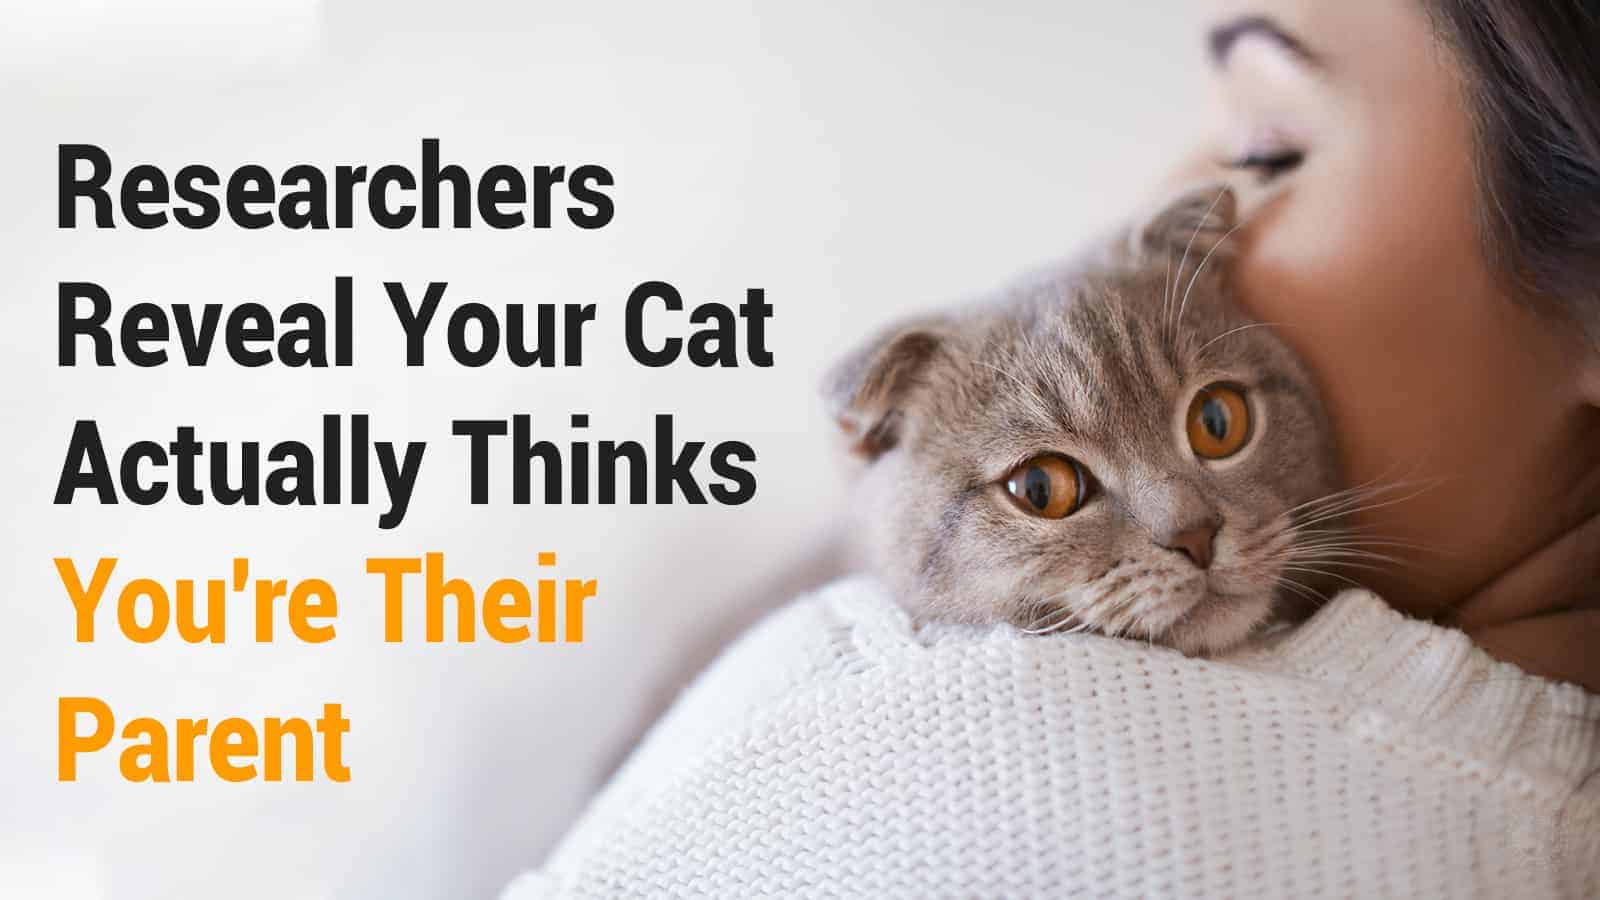 Researchers Reveal Your Cat Actually Thinks You’re Their Parent